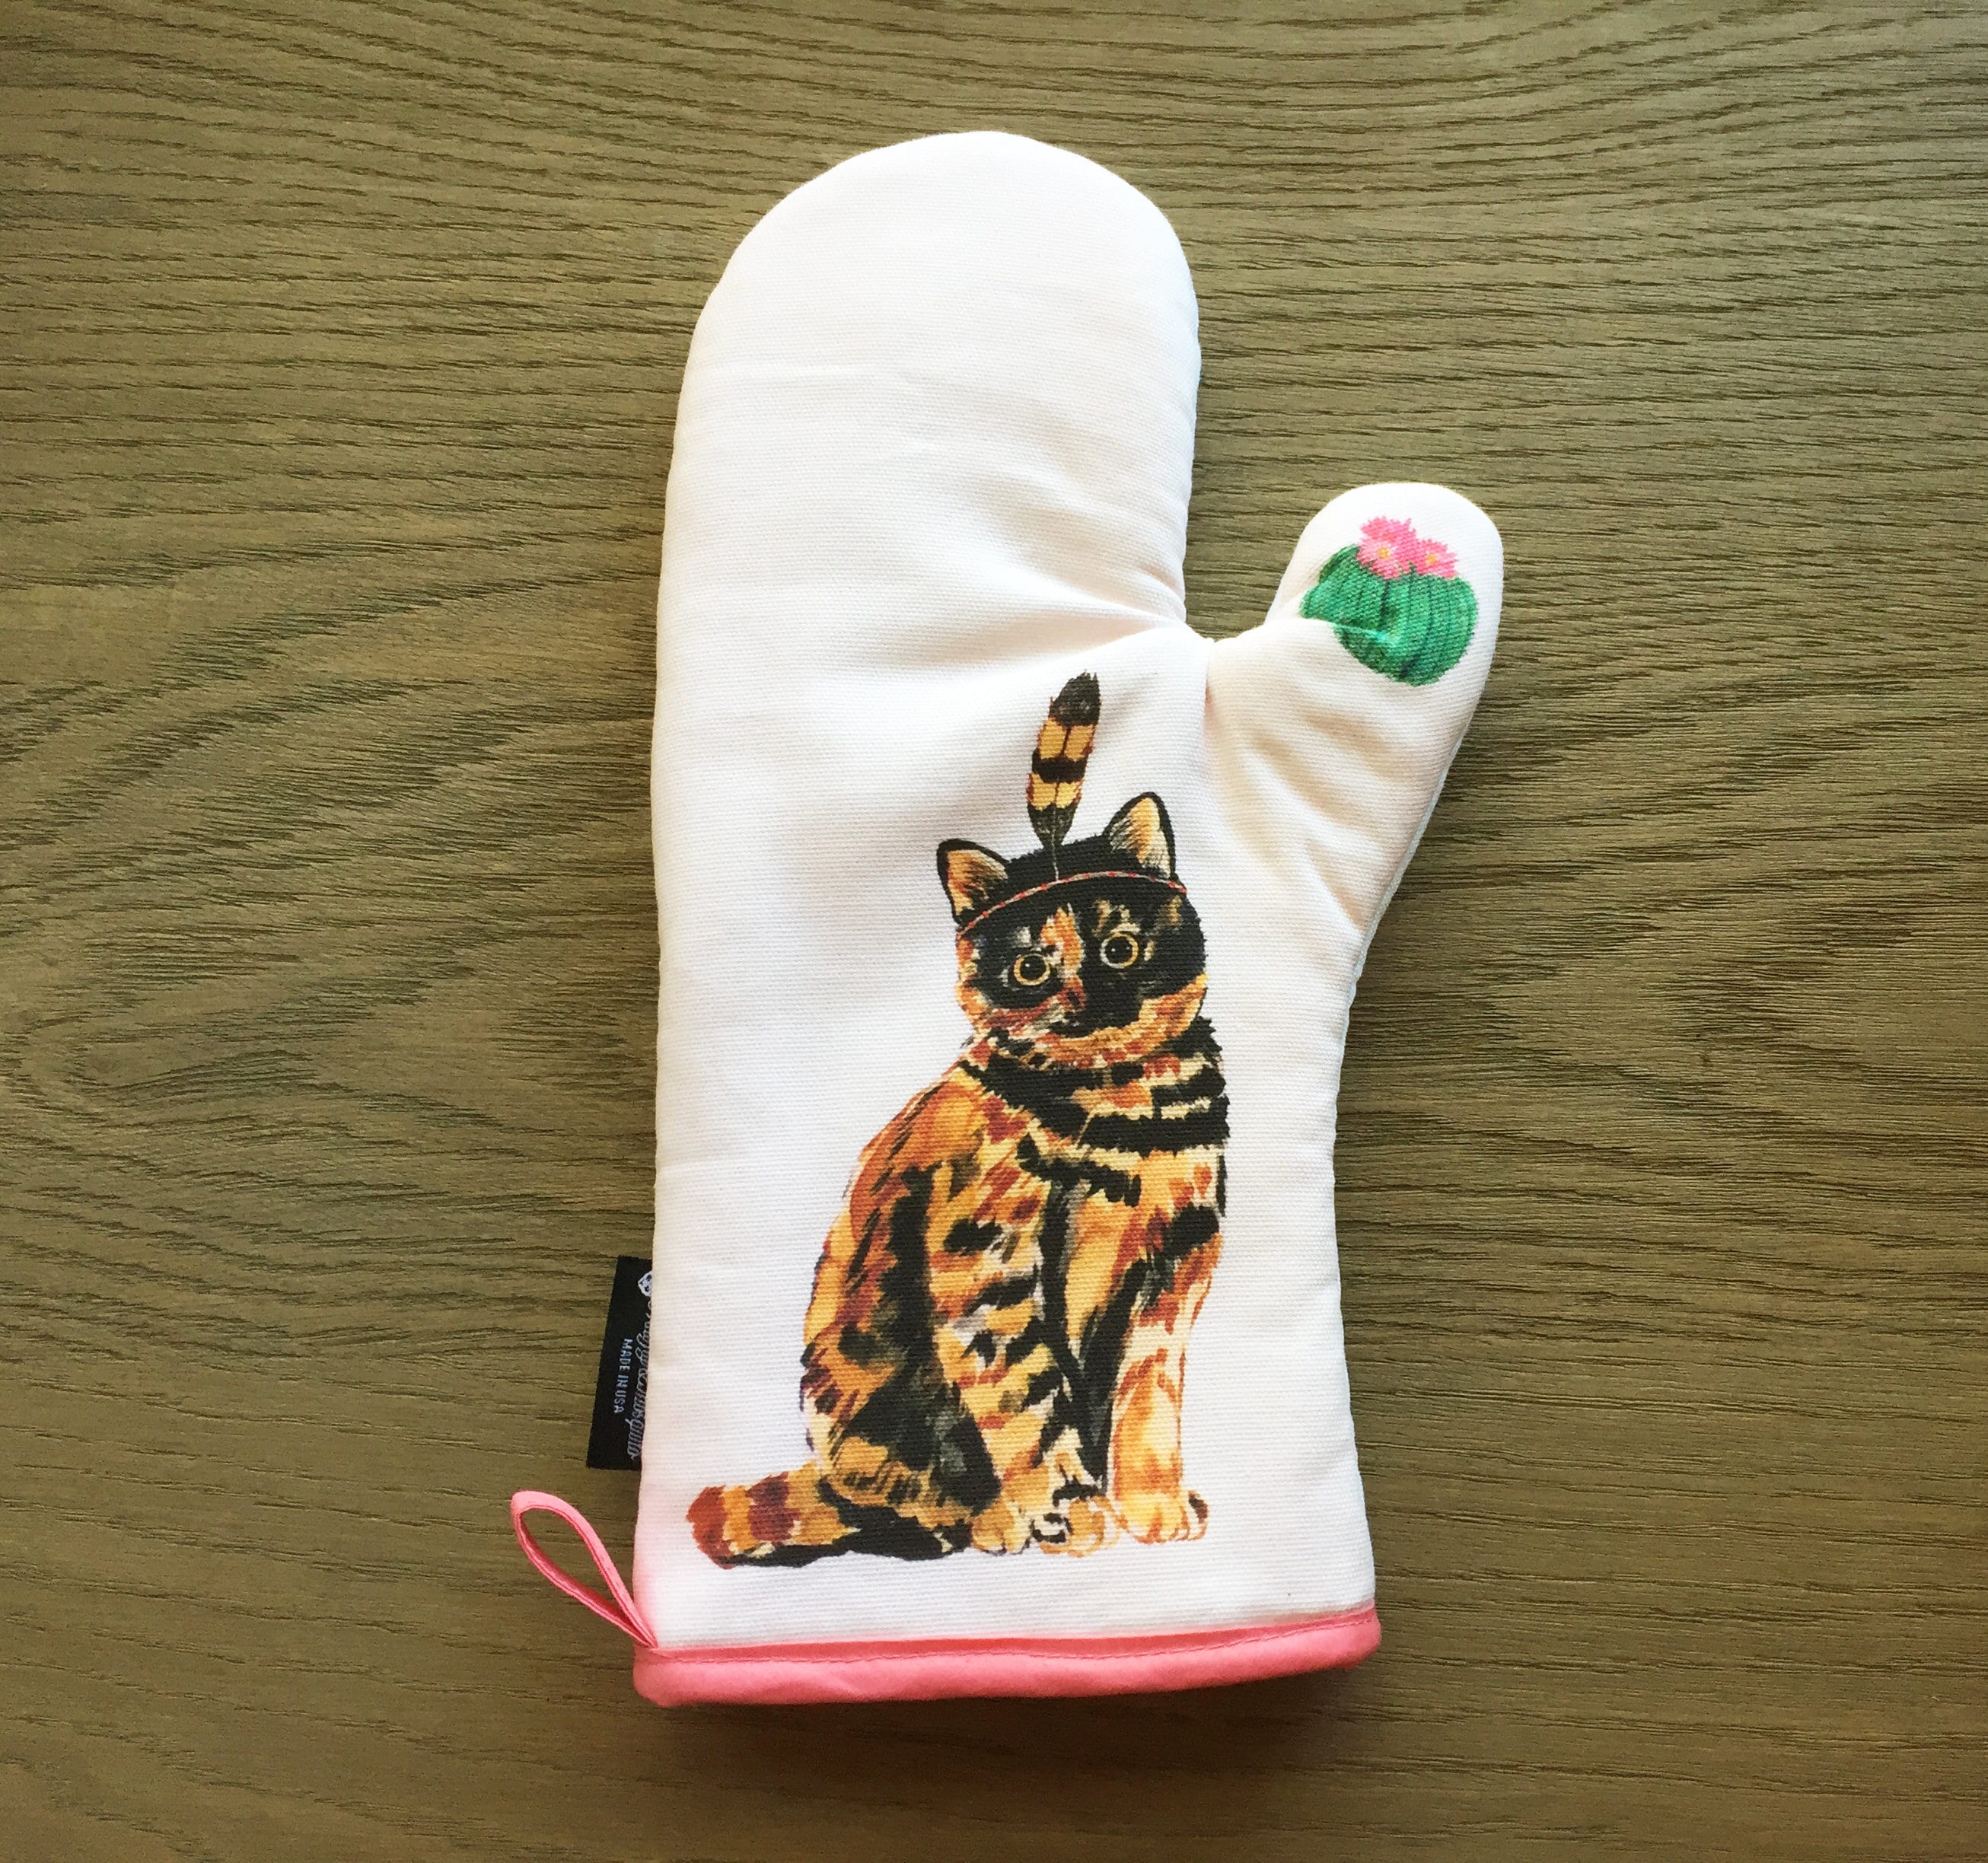 Cricket & Junebug Oven Mitts Cat Paws - Grey and Pink